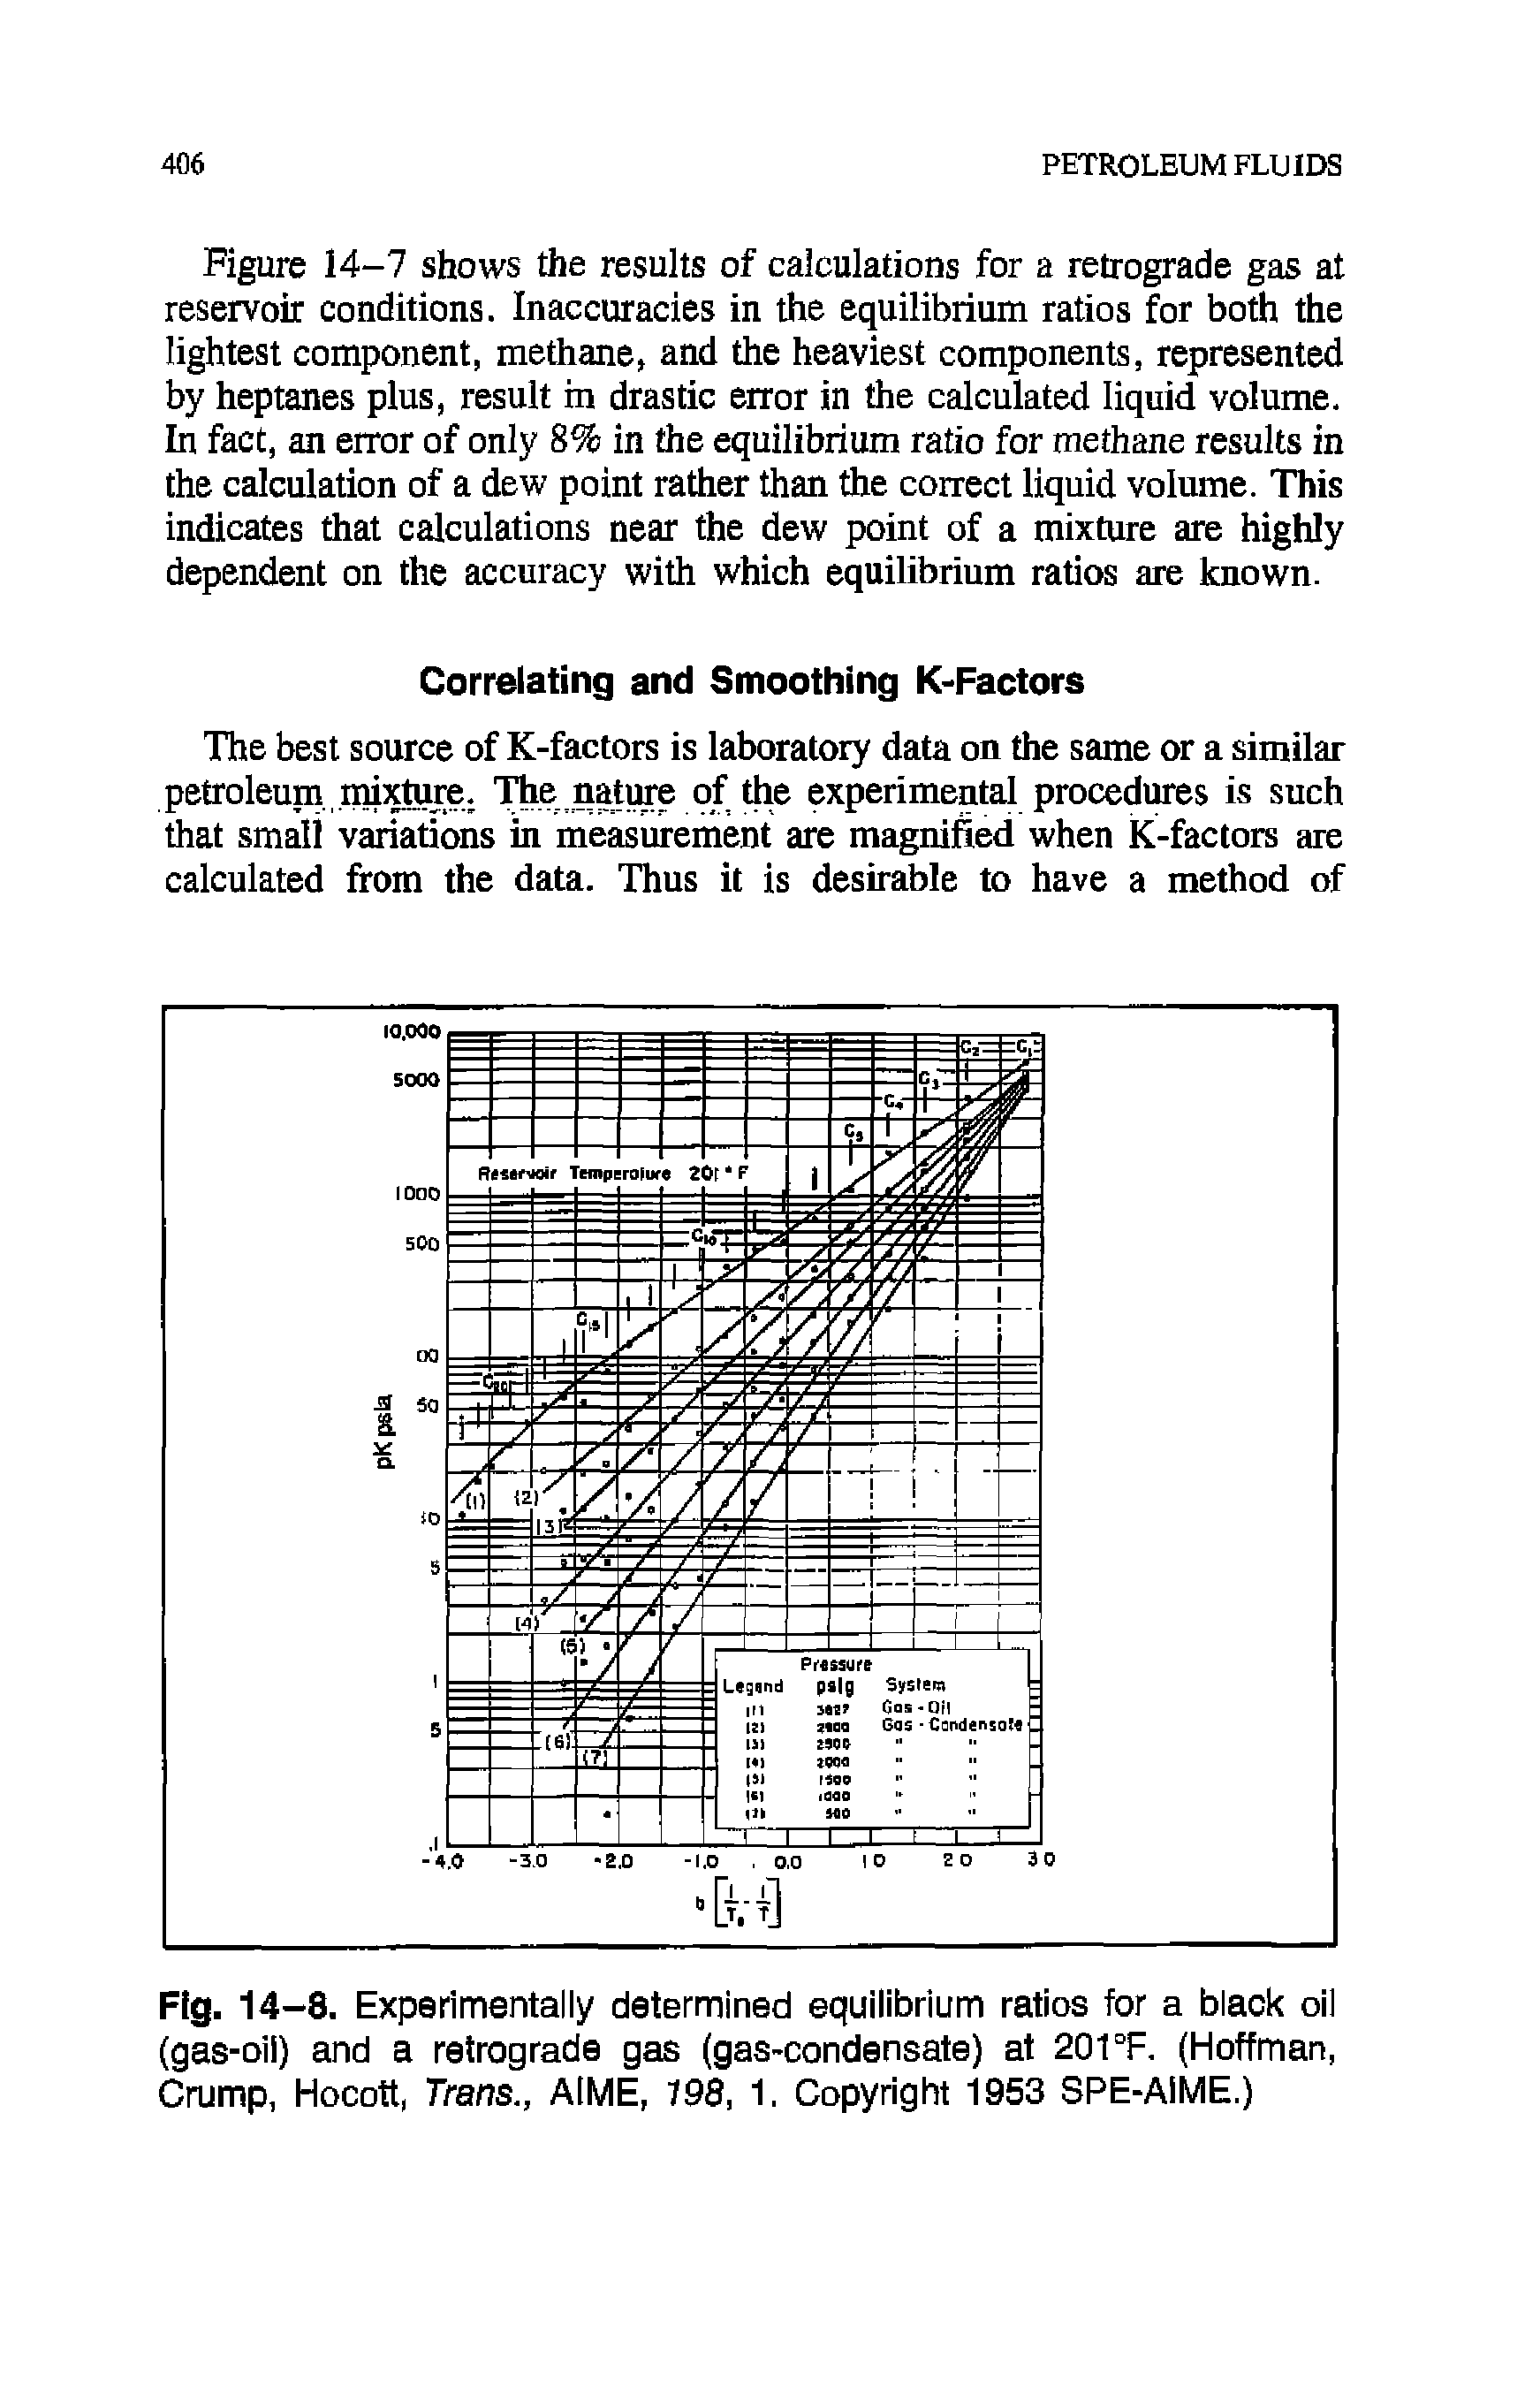 Fig. 14-8. Experimentally determined equilibrium ratios for a black oil (gas-oil) and a retrograde gas (gas-condensate) at 201 °F. (Hoffman, Crump, Hocott, Trans., AiME, 198, 1. Copyright 1953 SPE-AIME.)...